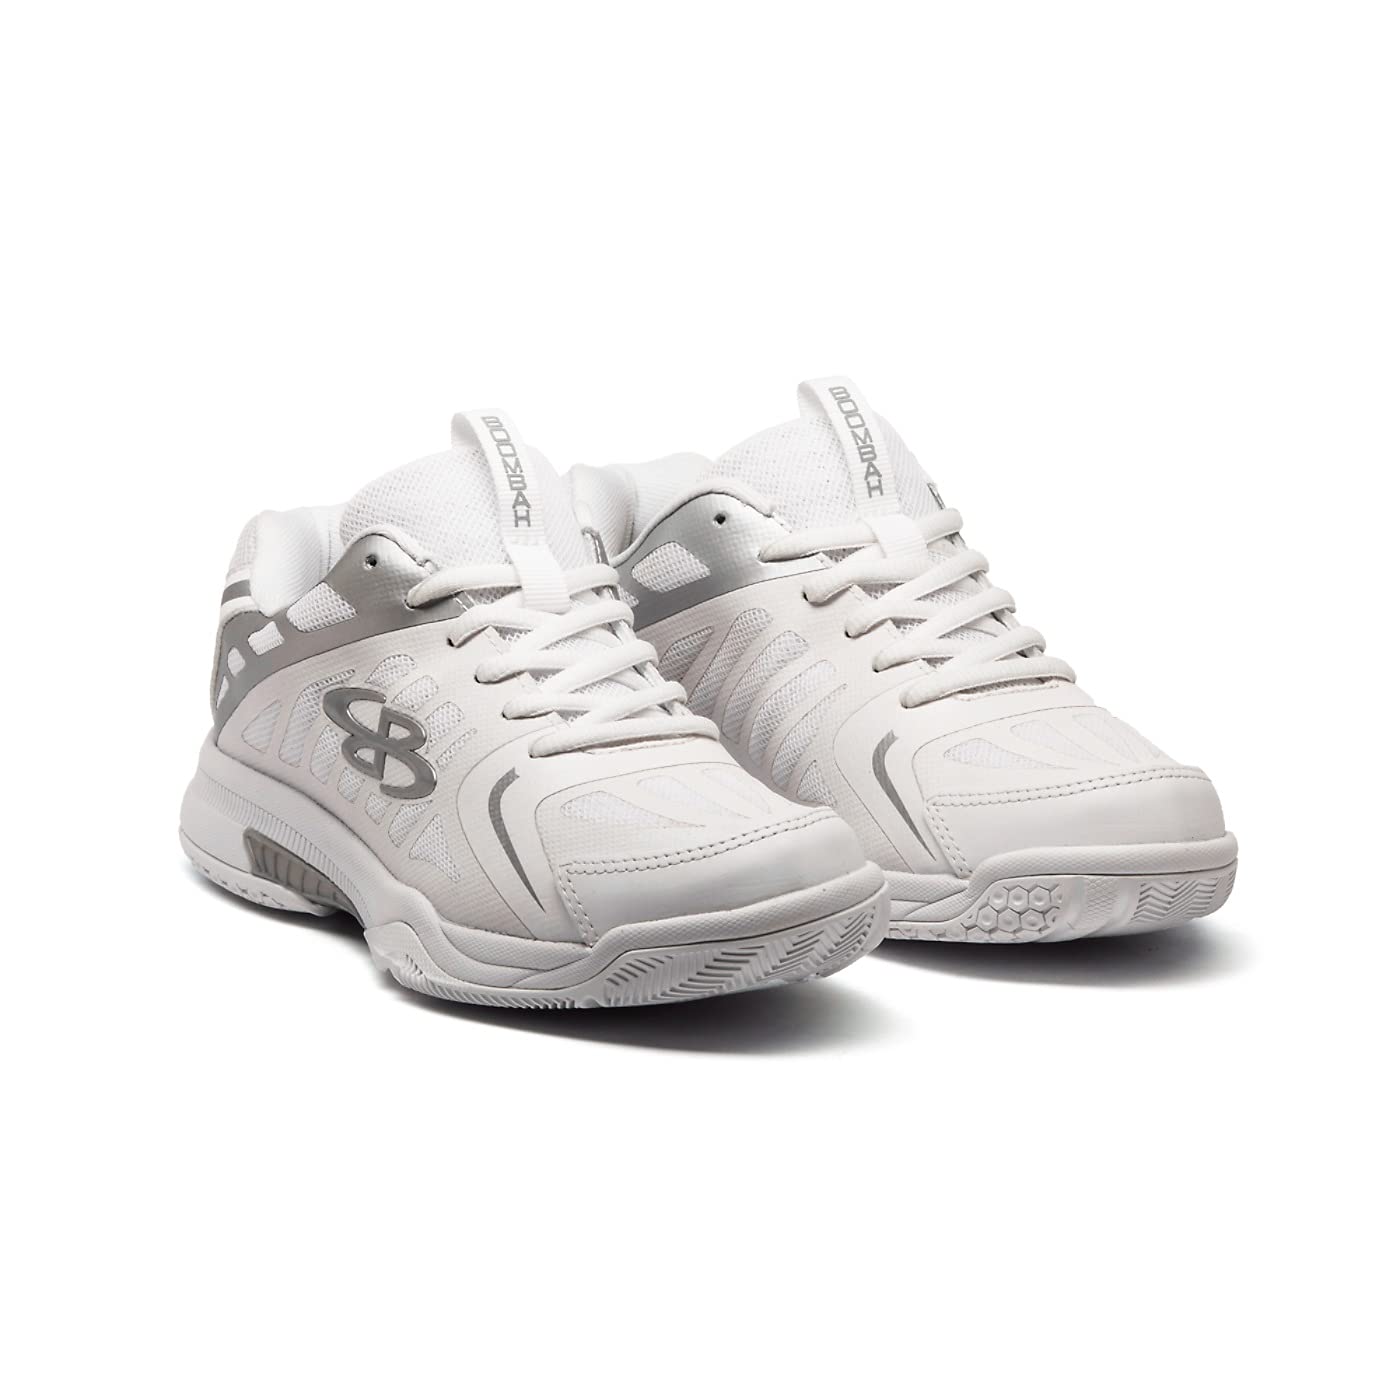 Boombah Women's Rally Volleyball Shoes White/Metallic Silver - Size 6